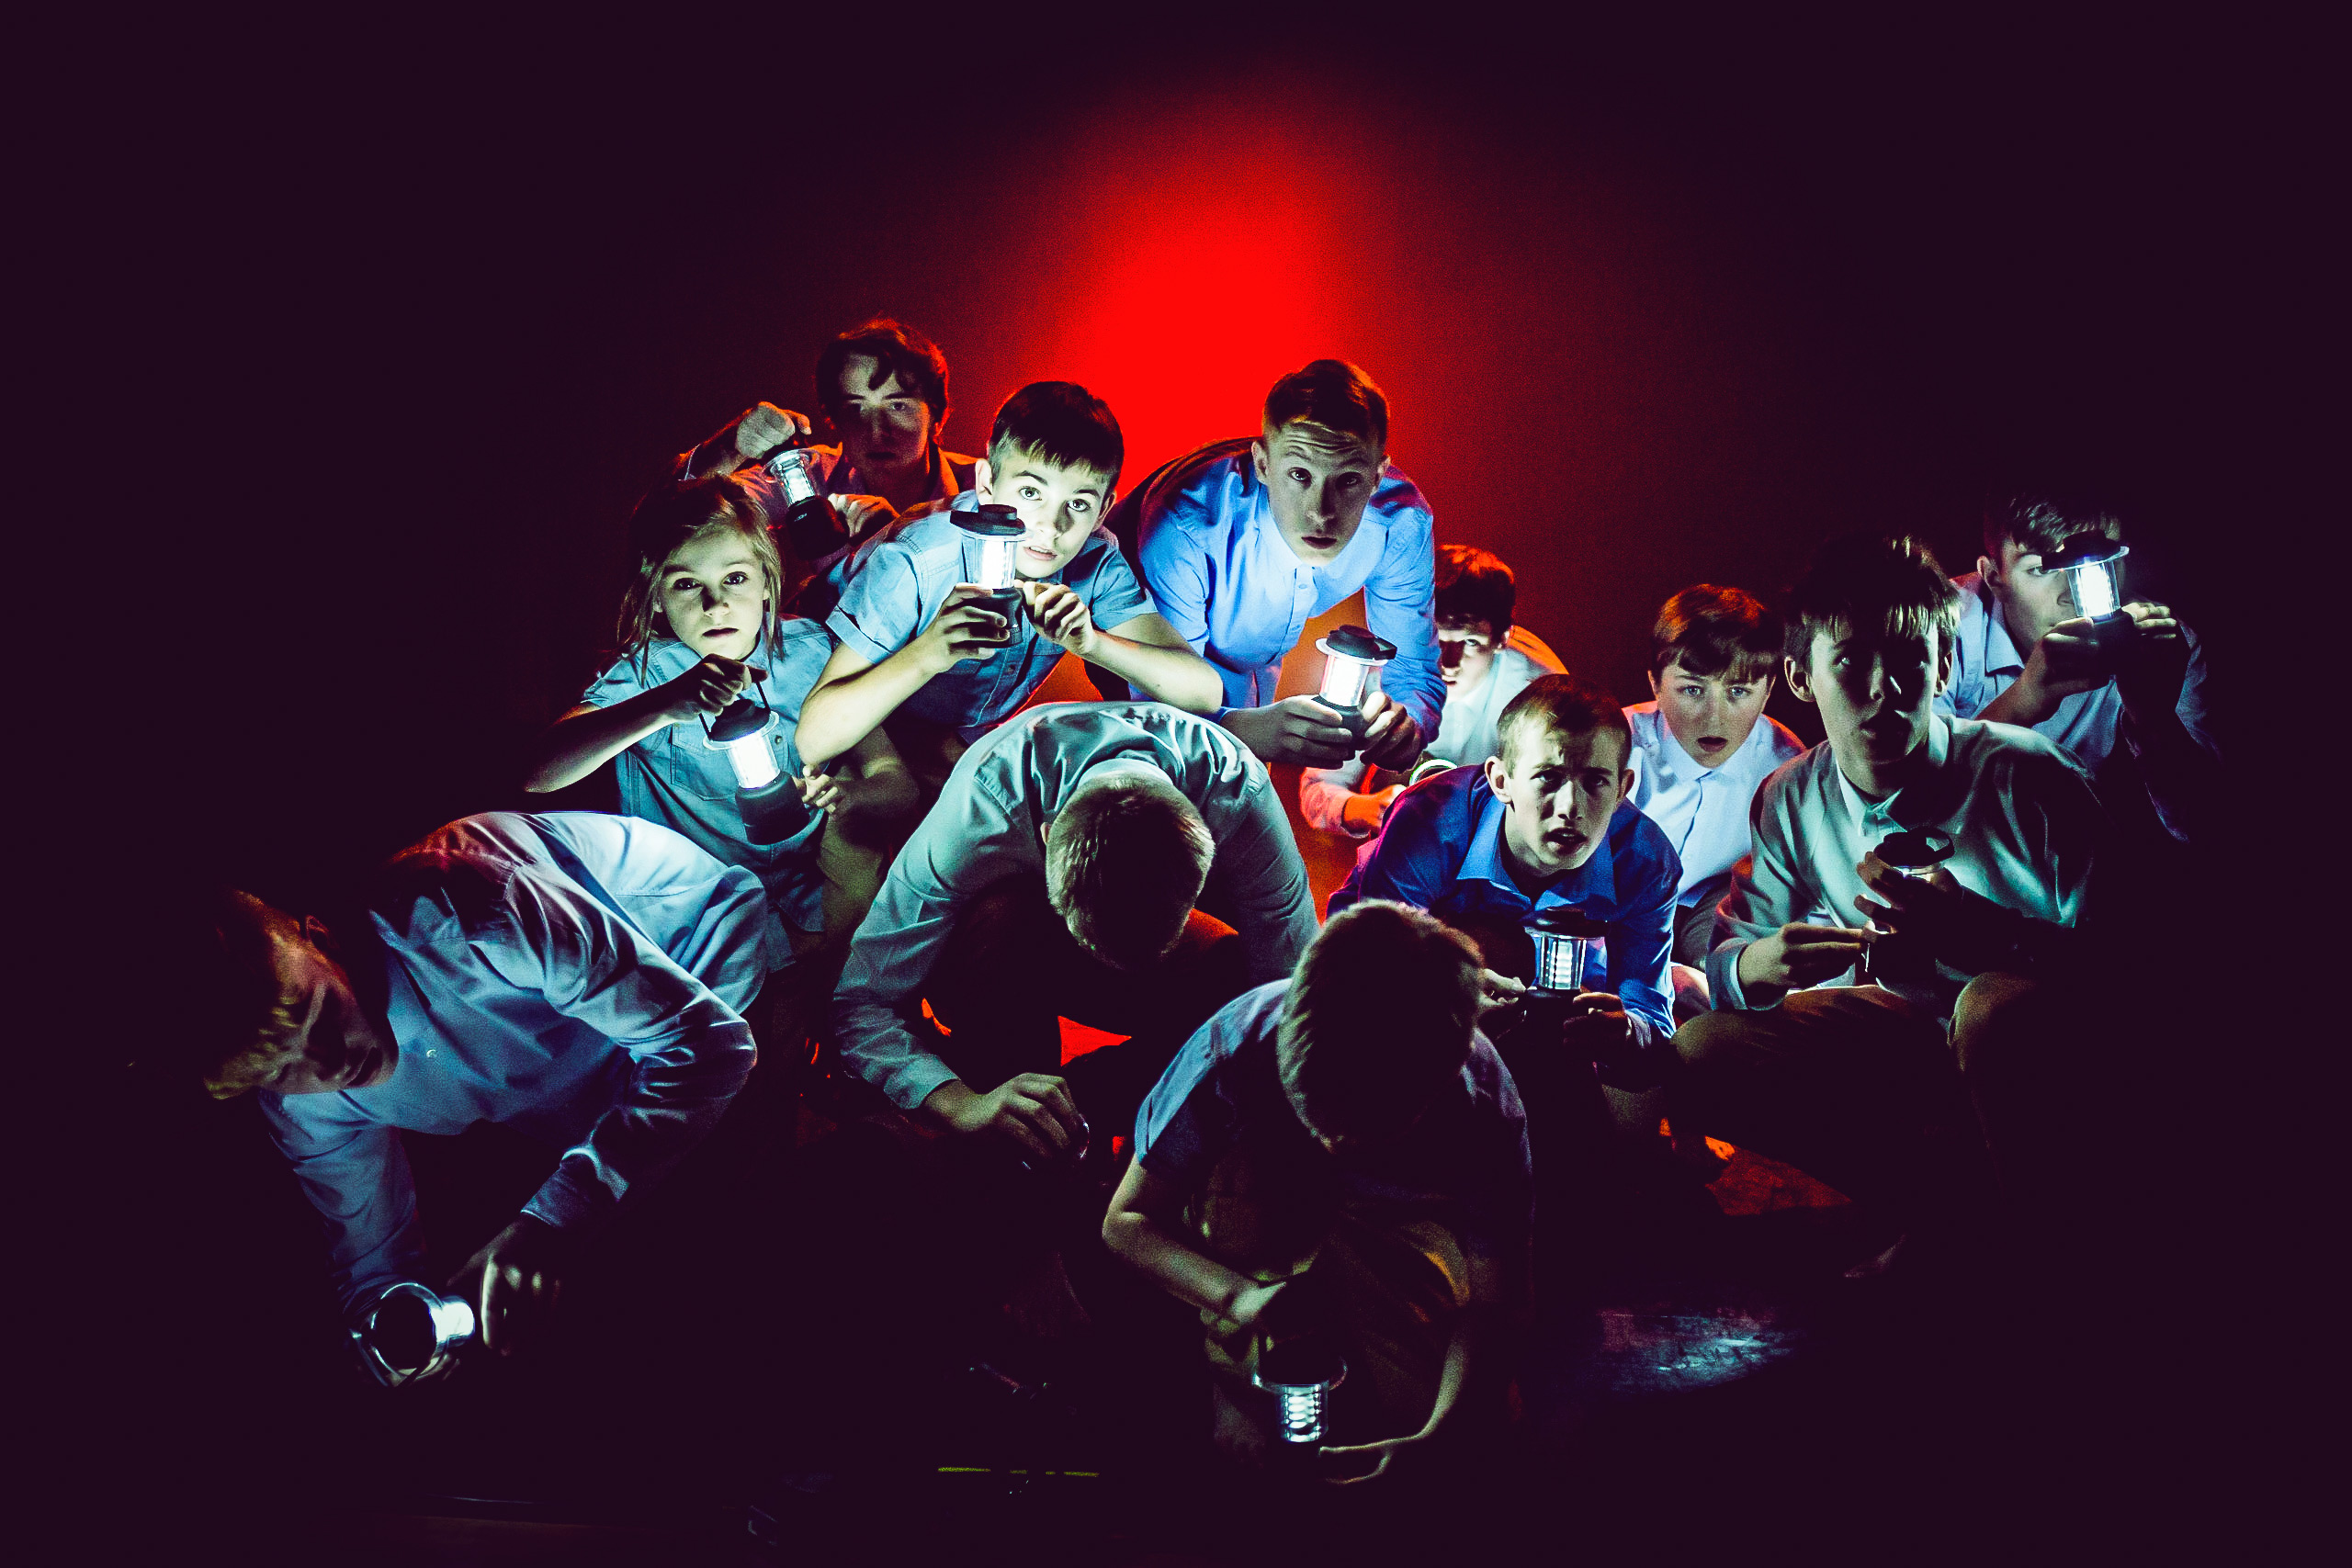 group of boys on a dark stage, shining torch lights in front of red back lighting. The boys are wearing blue tops and trousers and looking curious as they crouch in a huddle.